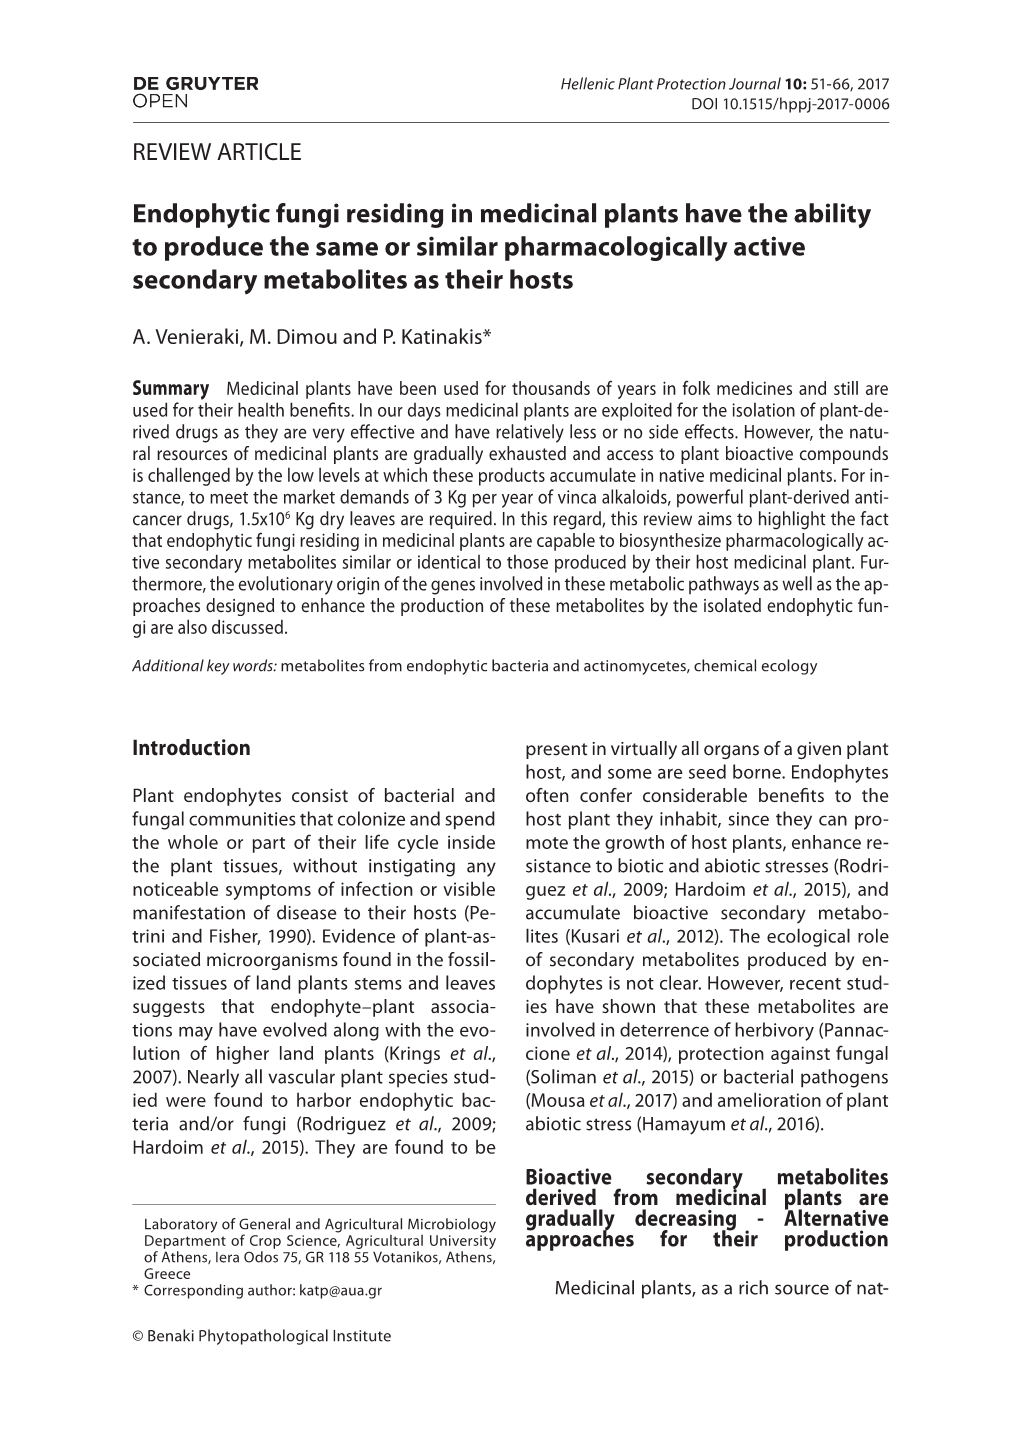 Endophytic Fungi Residing in Medicinal Plants Have the Ability to Produce the Same Or Similar Pharmacologically Active Secondary Metabolites As Their Hosts